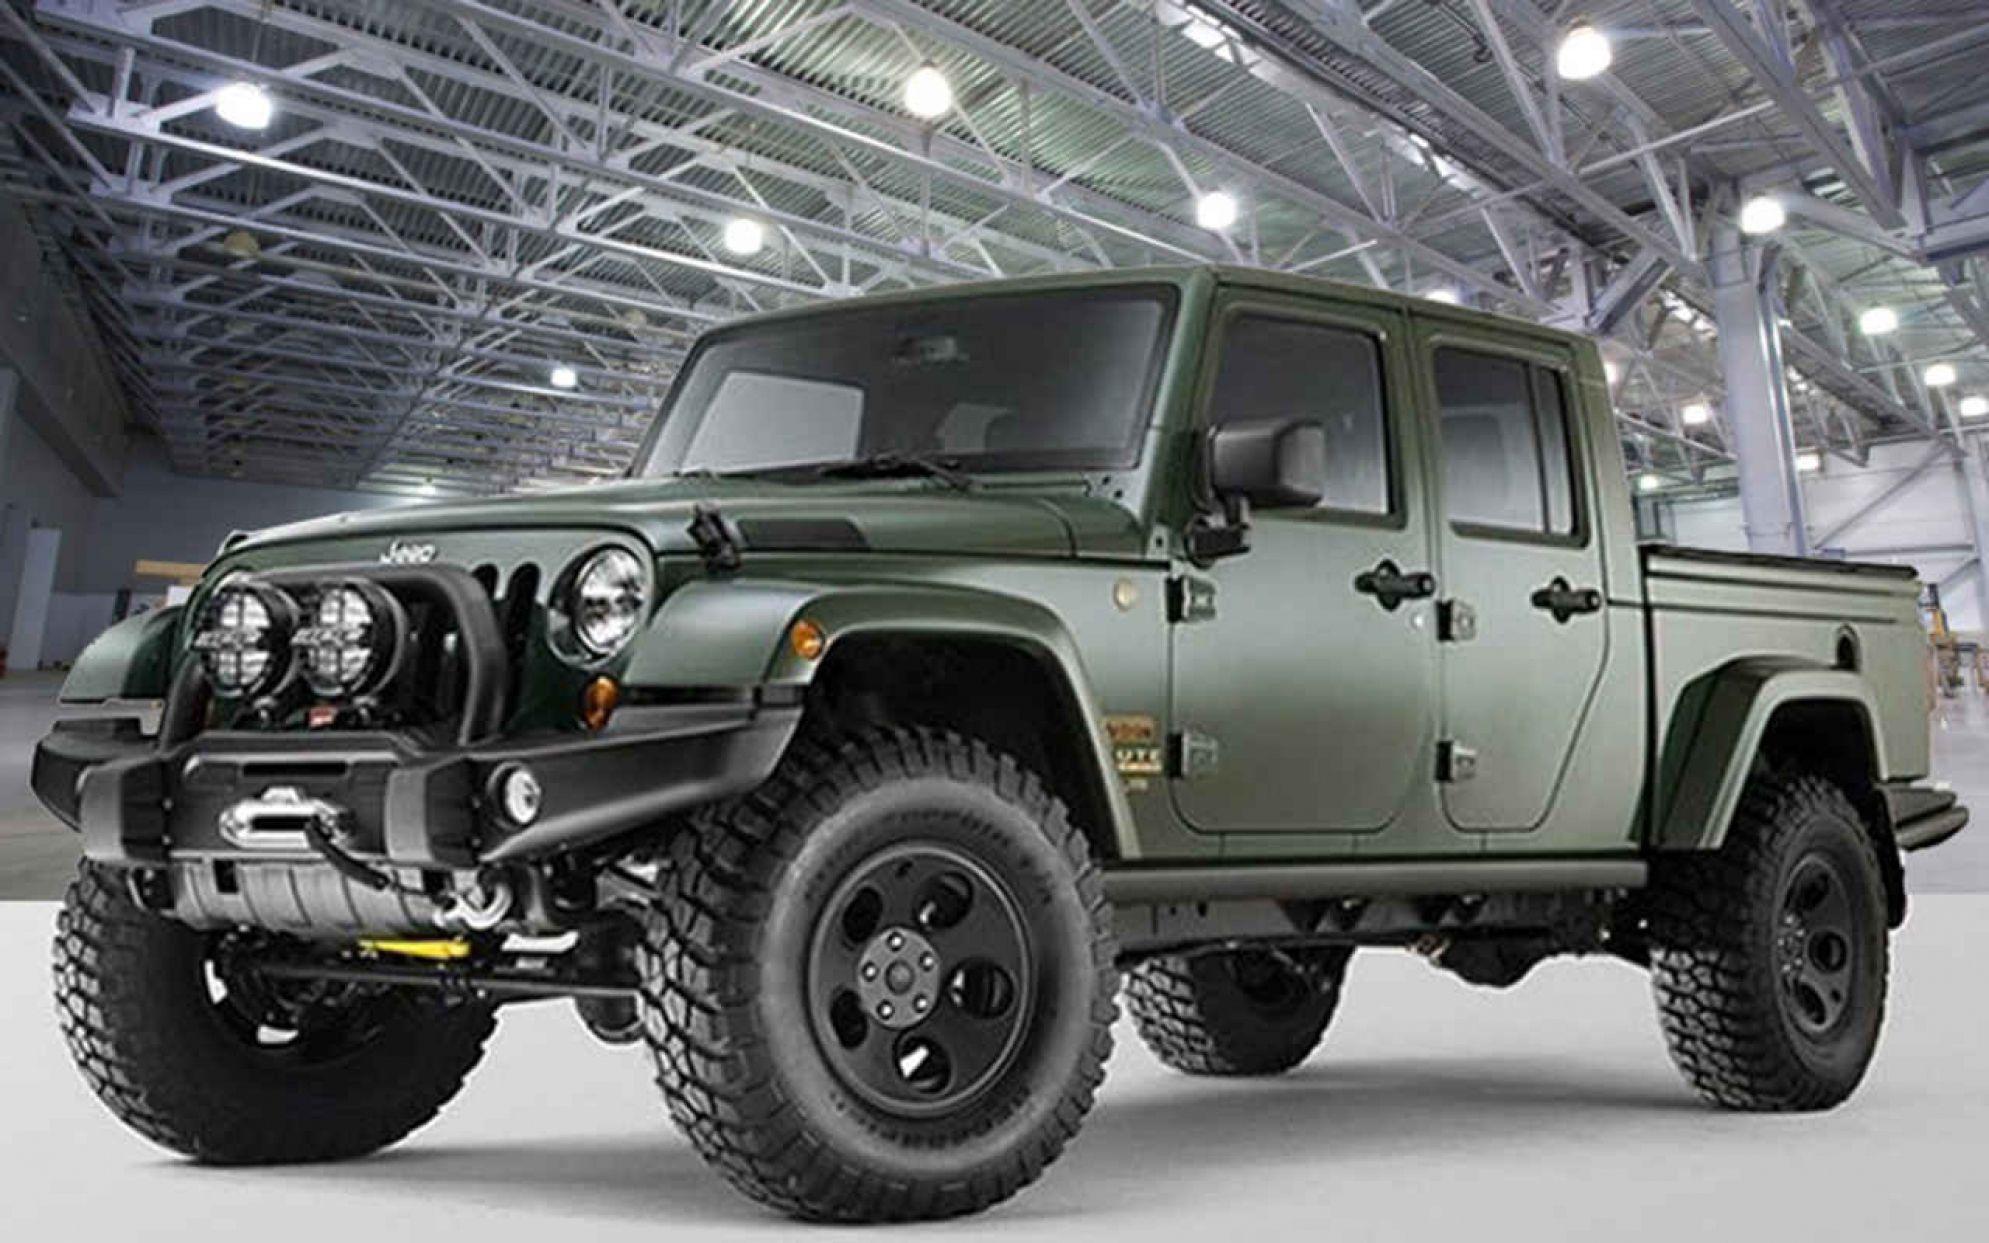 2018 Jeep Wrangler Gladiator Backgrounds Wallpapers